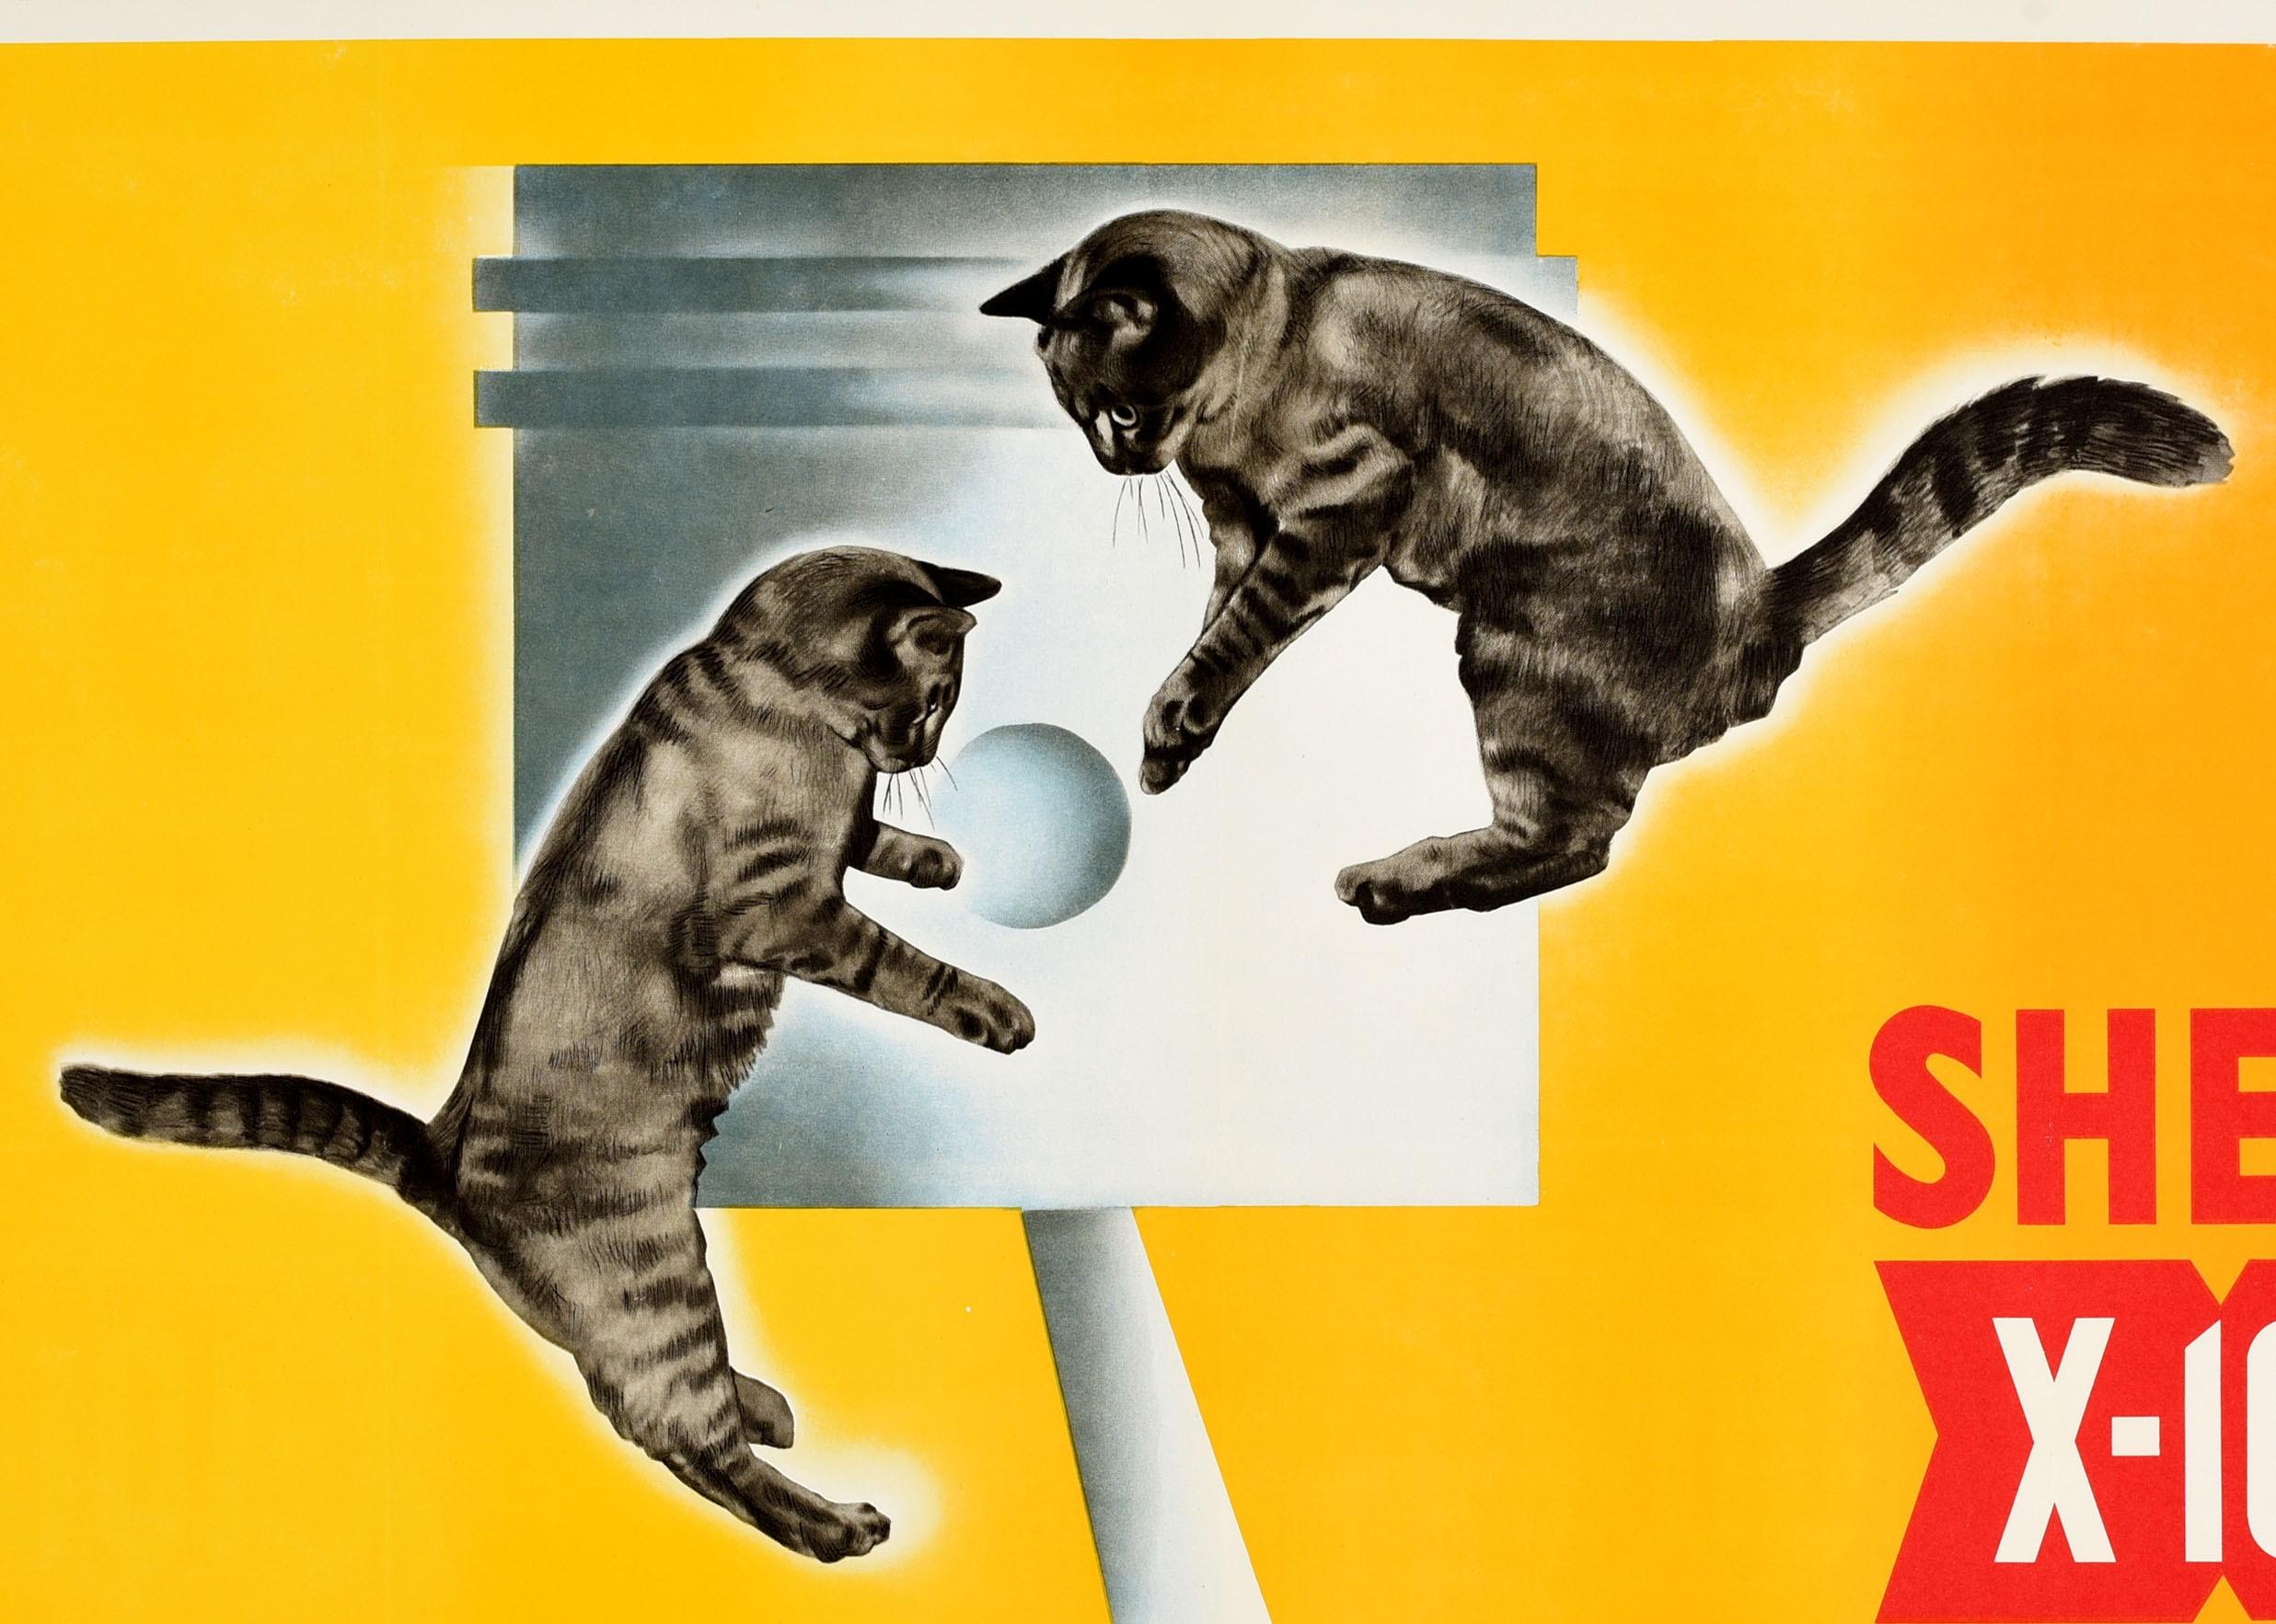 Original Vintage Advertising Poster Shell X-100 Motor Oil Engine Kittens Design - Print by Unknown